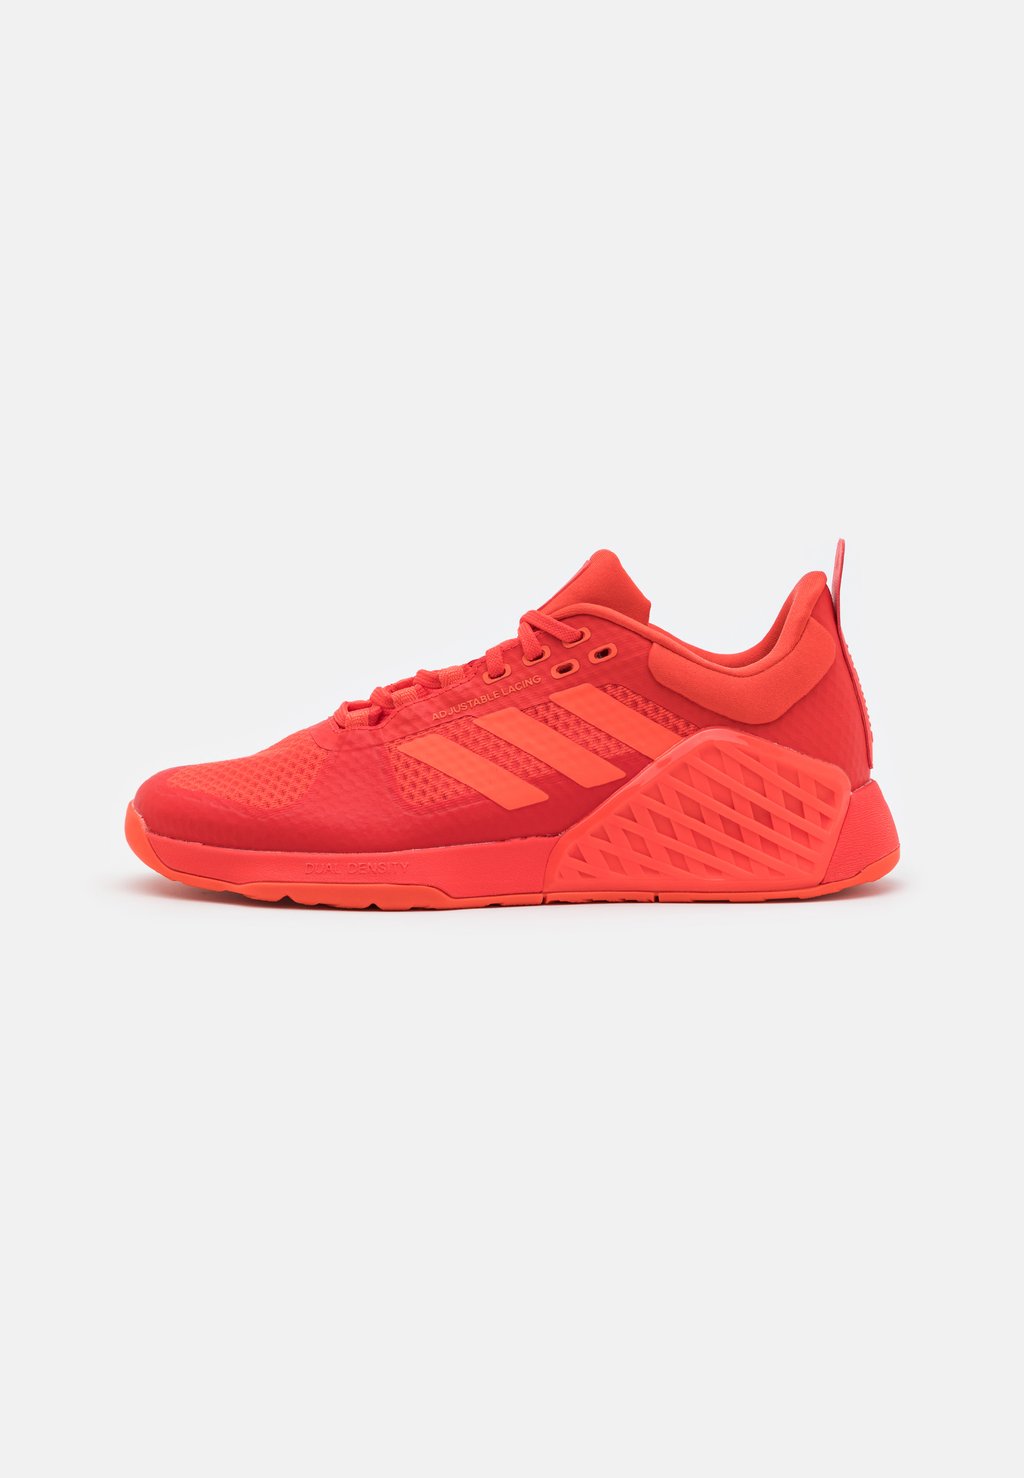 Кроссовки DROPSET 2 TRAINER adidas Performance, цвет bright red/solar red/shadow red red